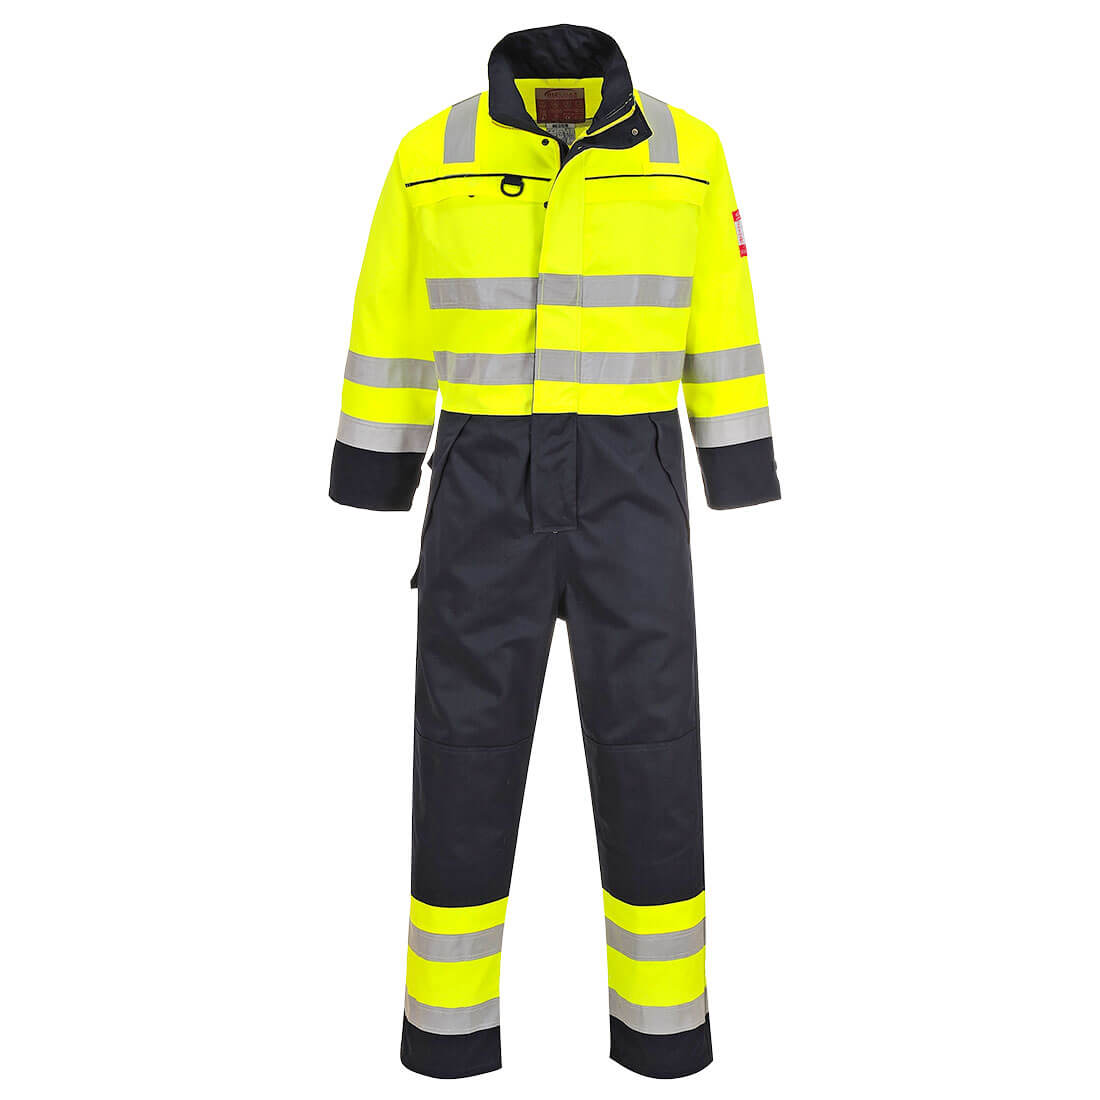 Portwest Hi-Vis Bizflame Multi-Norm Overall - Flame Resistant Welders Coverall FR60